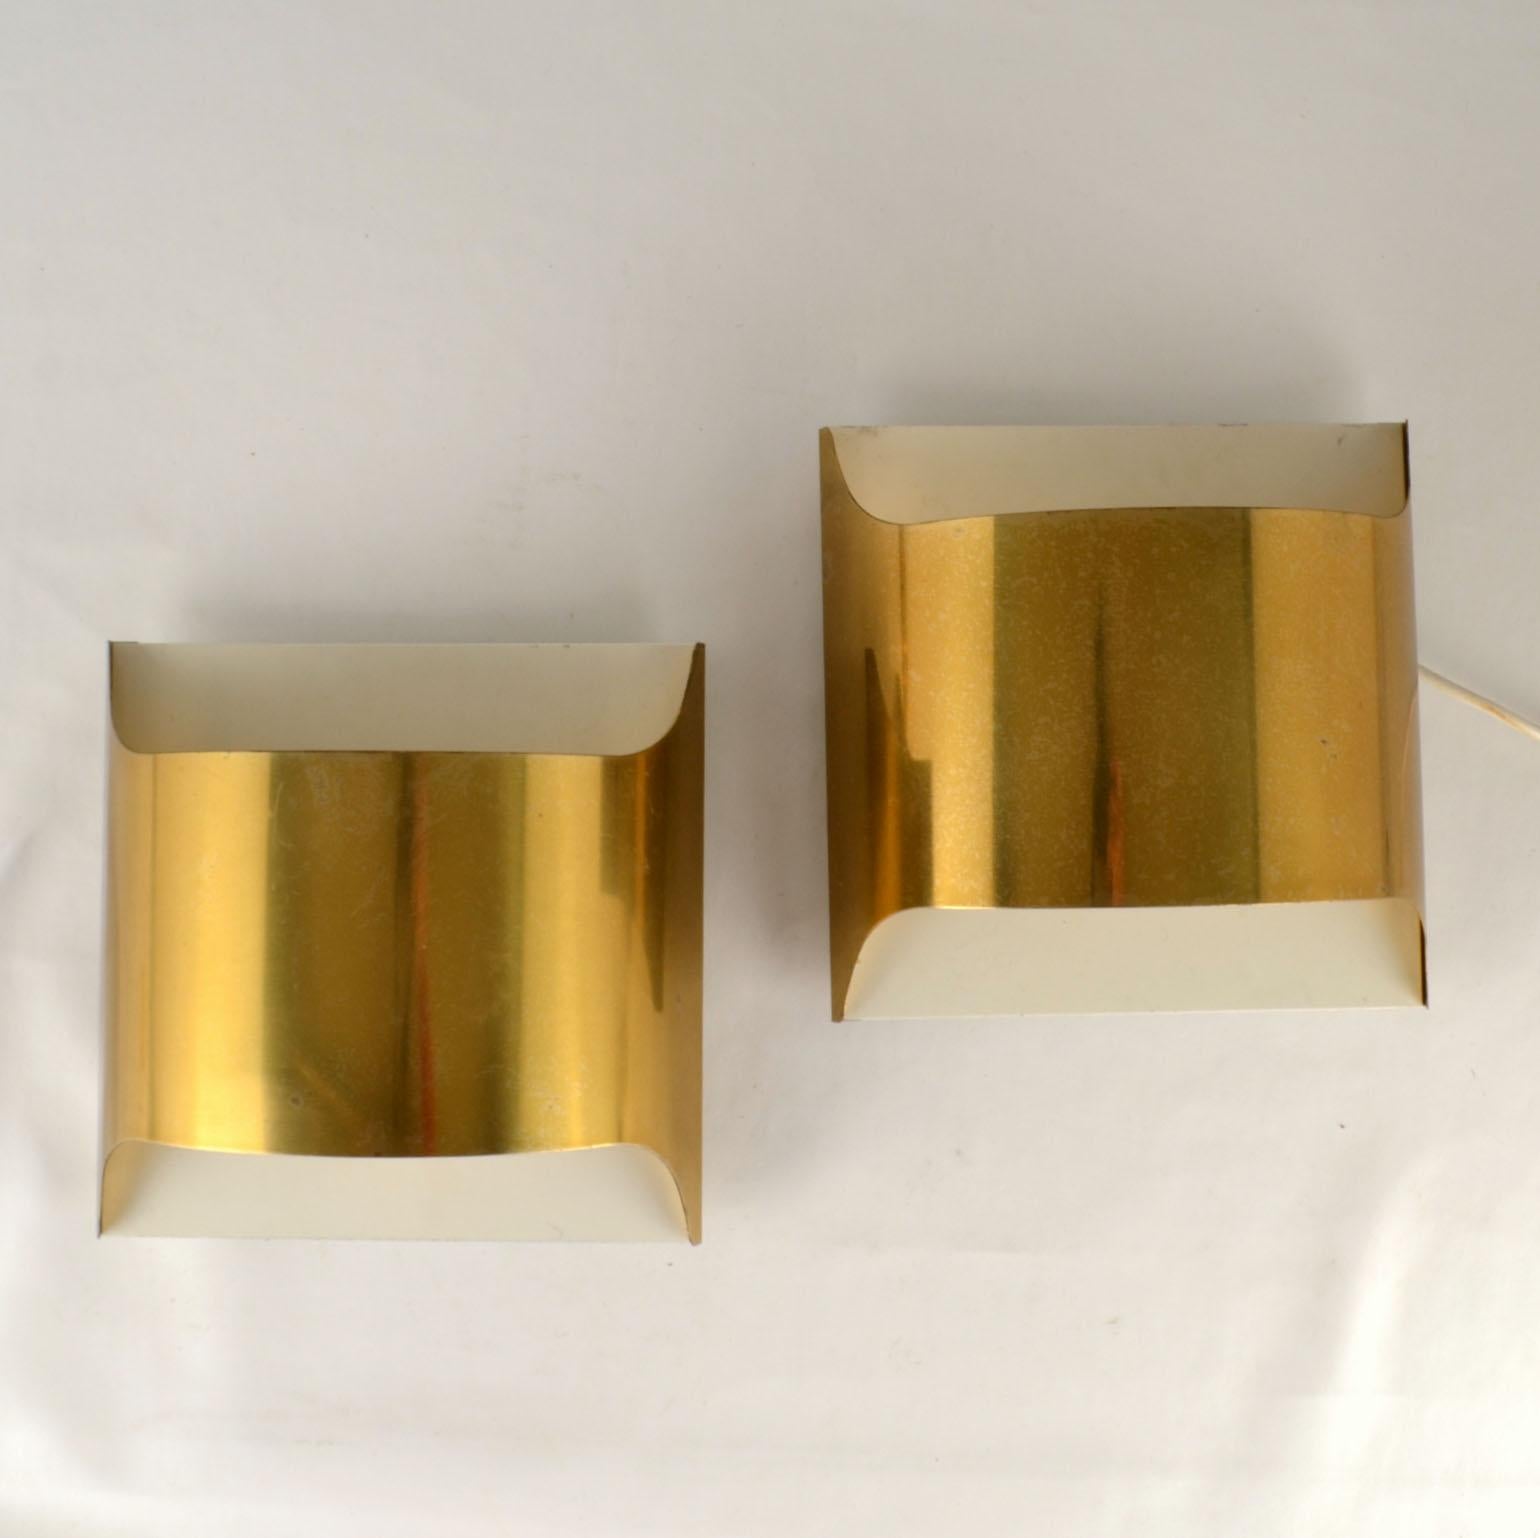 Pair of Italian minimalist brass 1960's wall mounted sconces are made of curved sheet encased in a flush mount metal wall bracket. The wall lights are creating up and down wall washed light that is reinforced by Internally white enamel reflection.